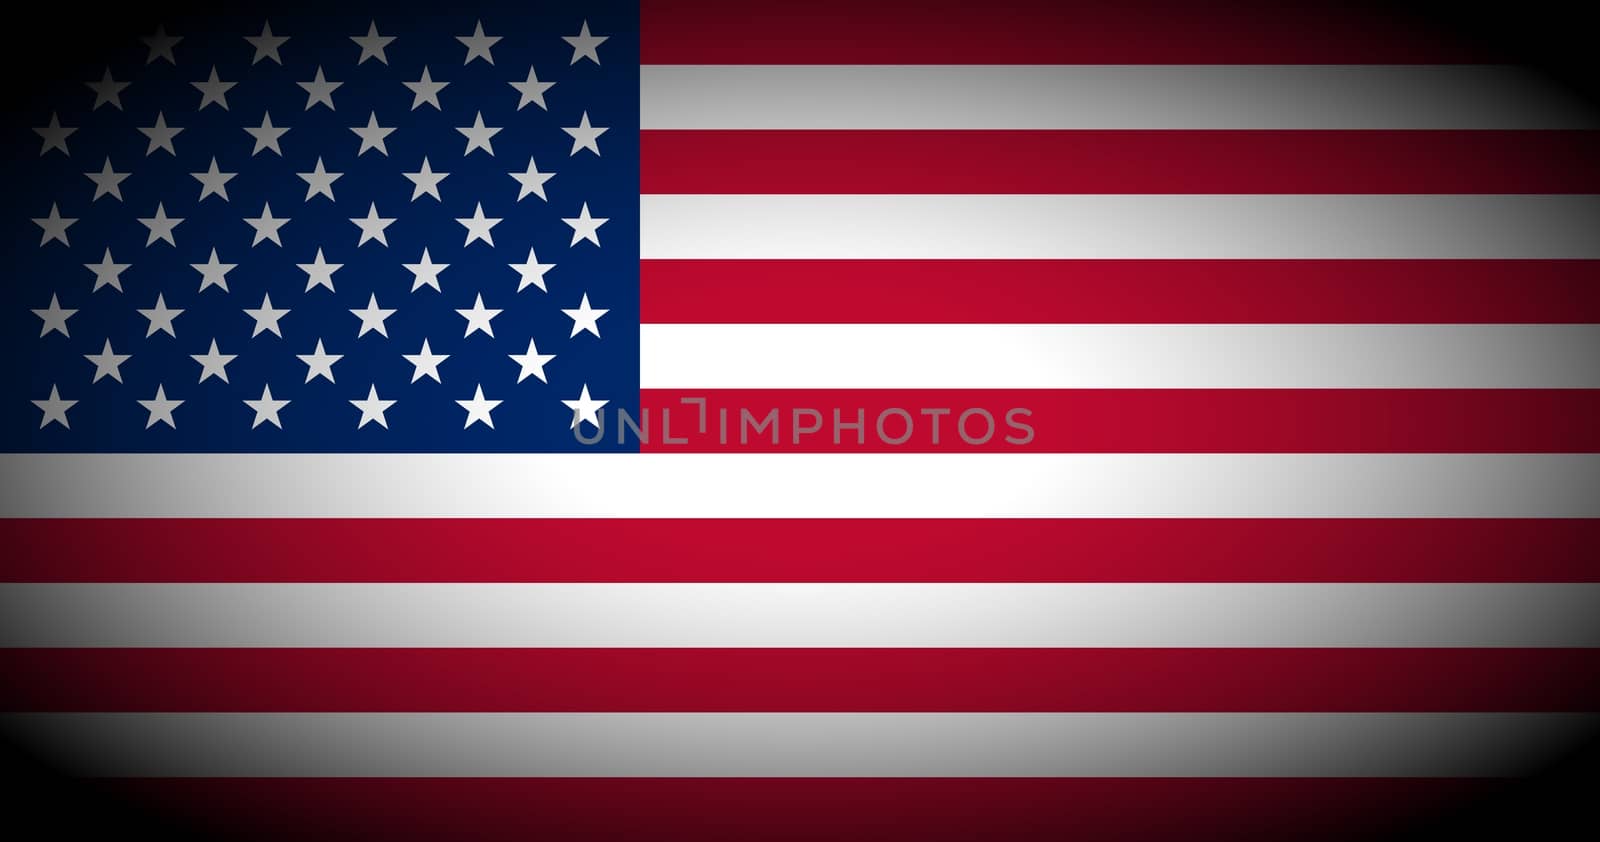 Flag of the USA (United States of America) - isolated illustration vignetted